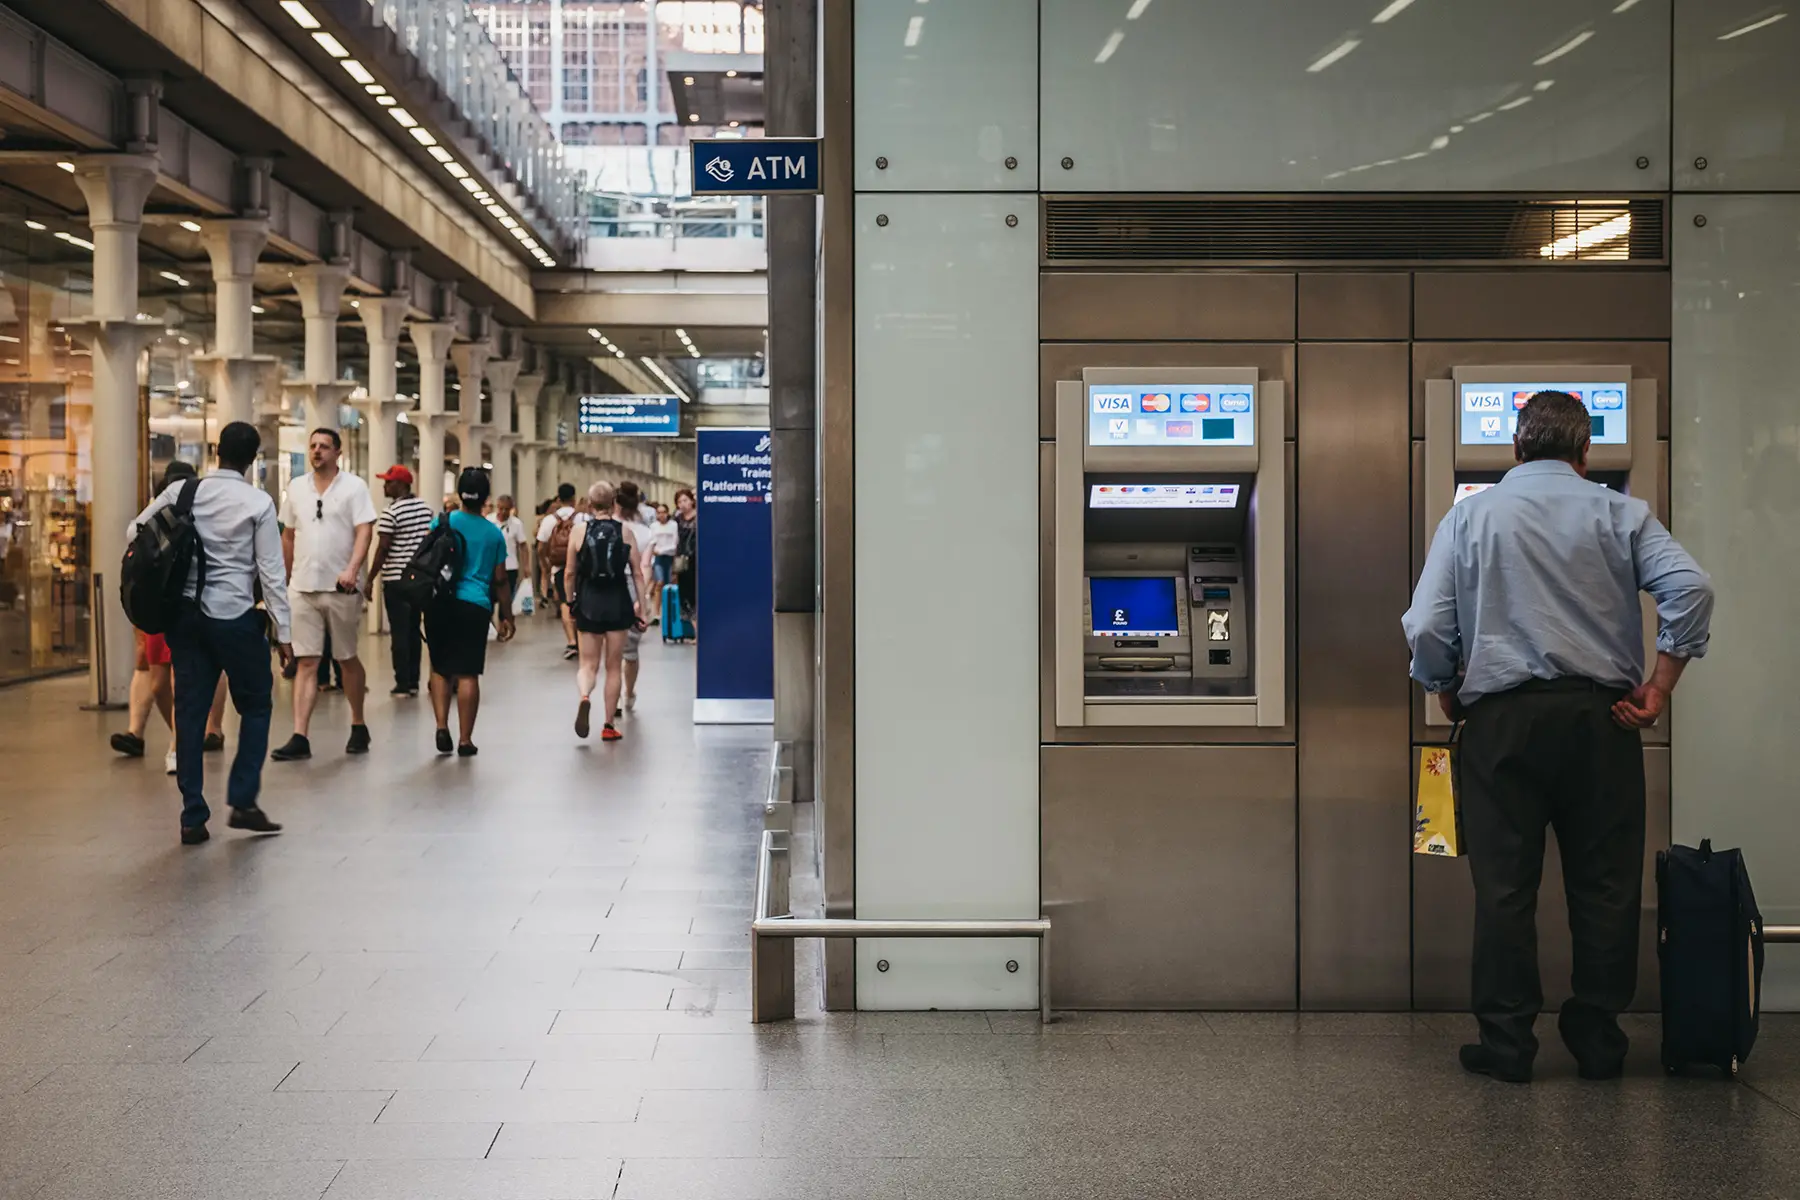 A man uses an ATM at St Pancras station